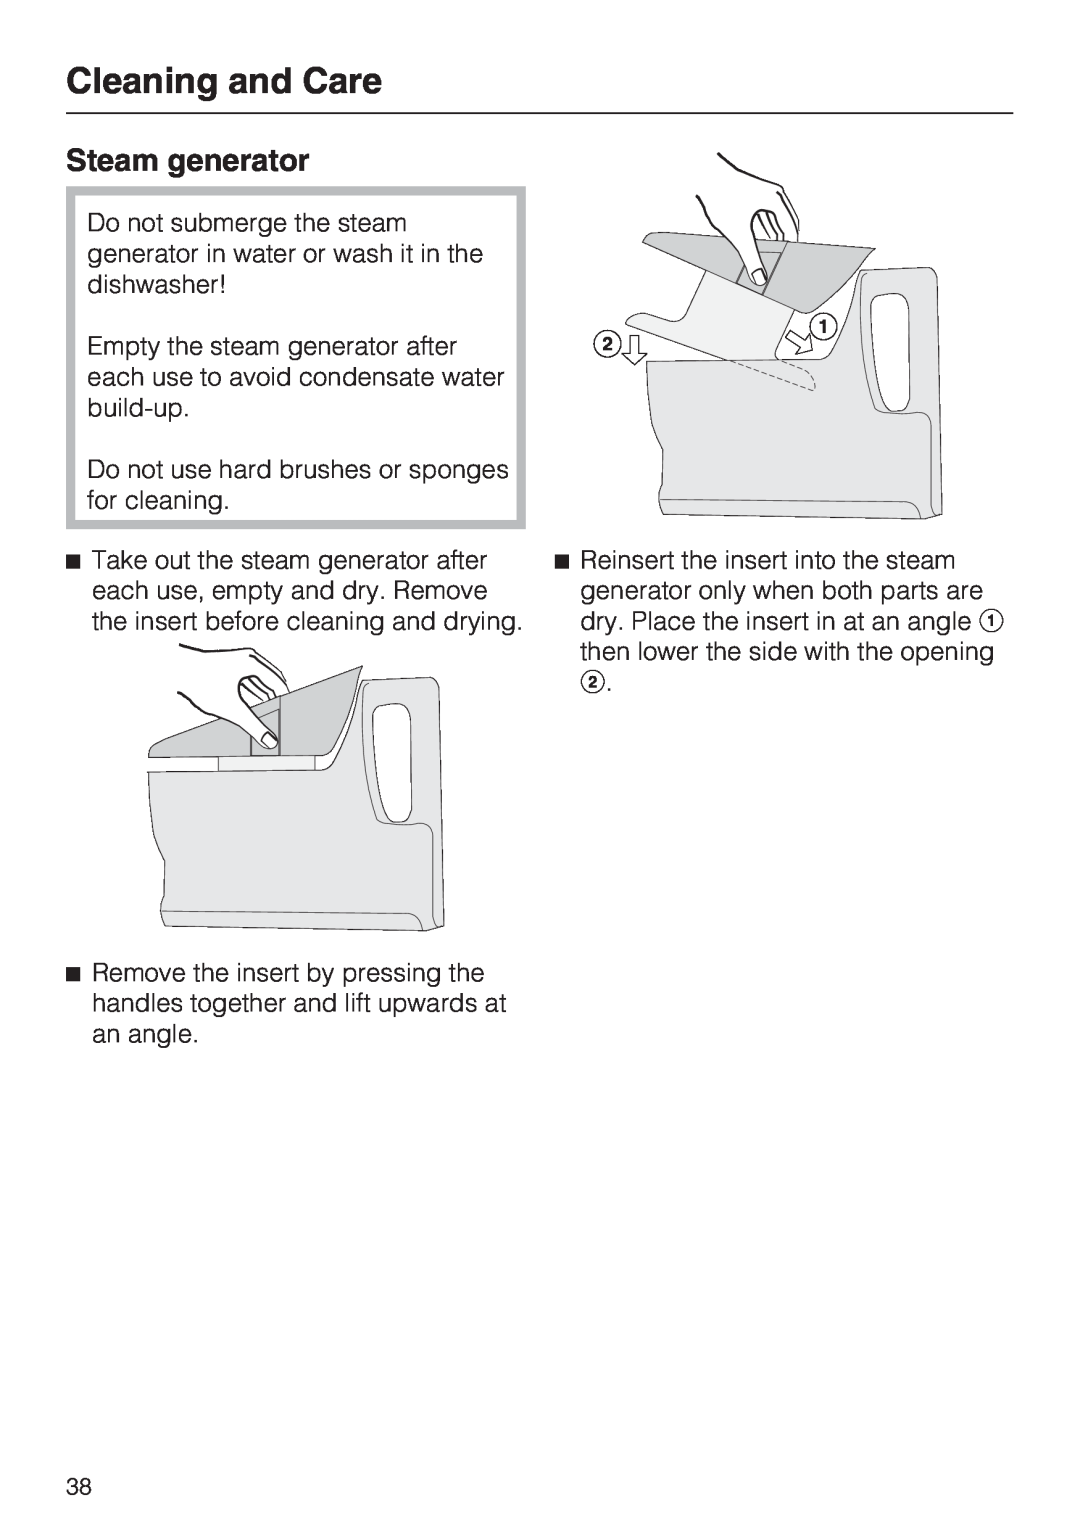 Miele DG4082, DG 4088 installation instructions Steam generator, Cleaning and Care 